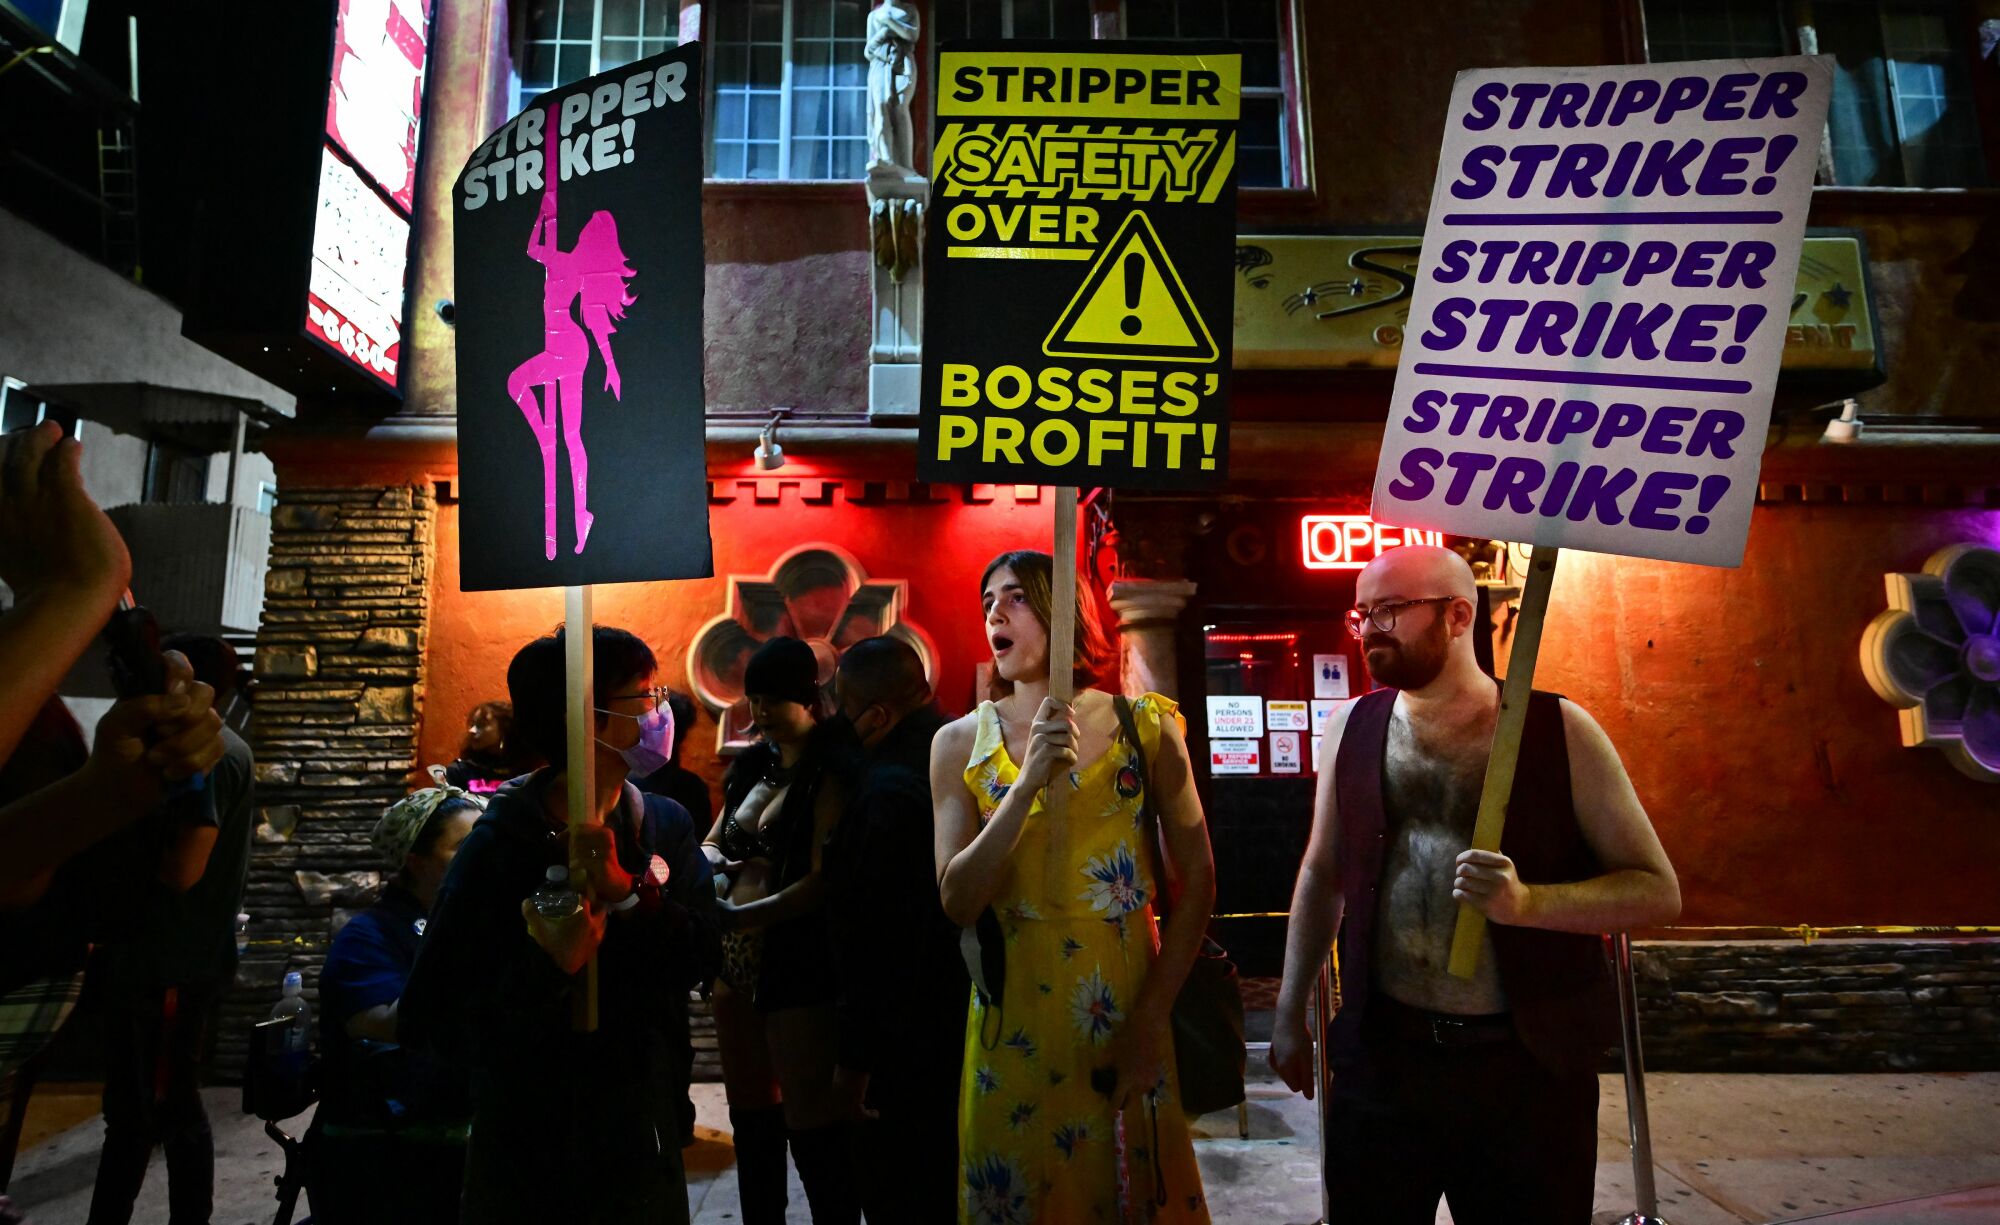 Three people join the stripper strike holding picket signs that read "stripper strike!" and "stripper safety over bosses' profit".